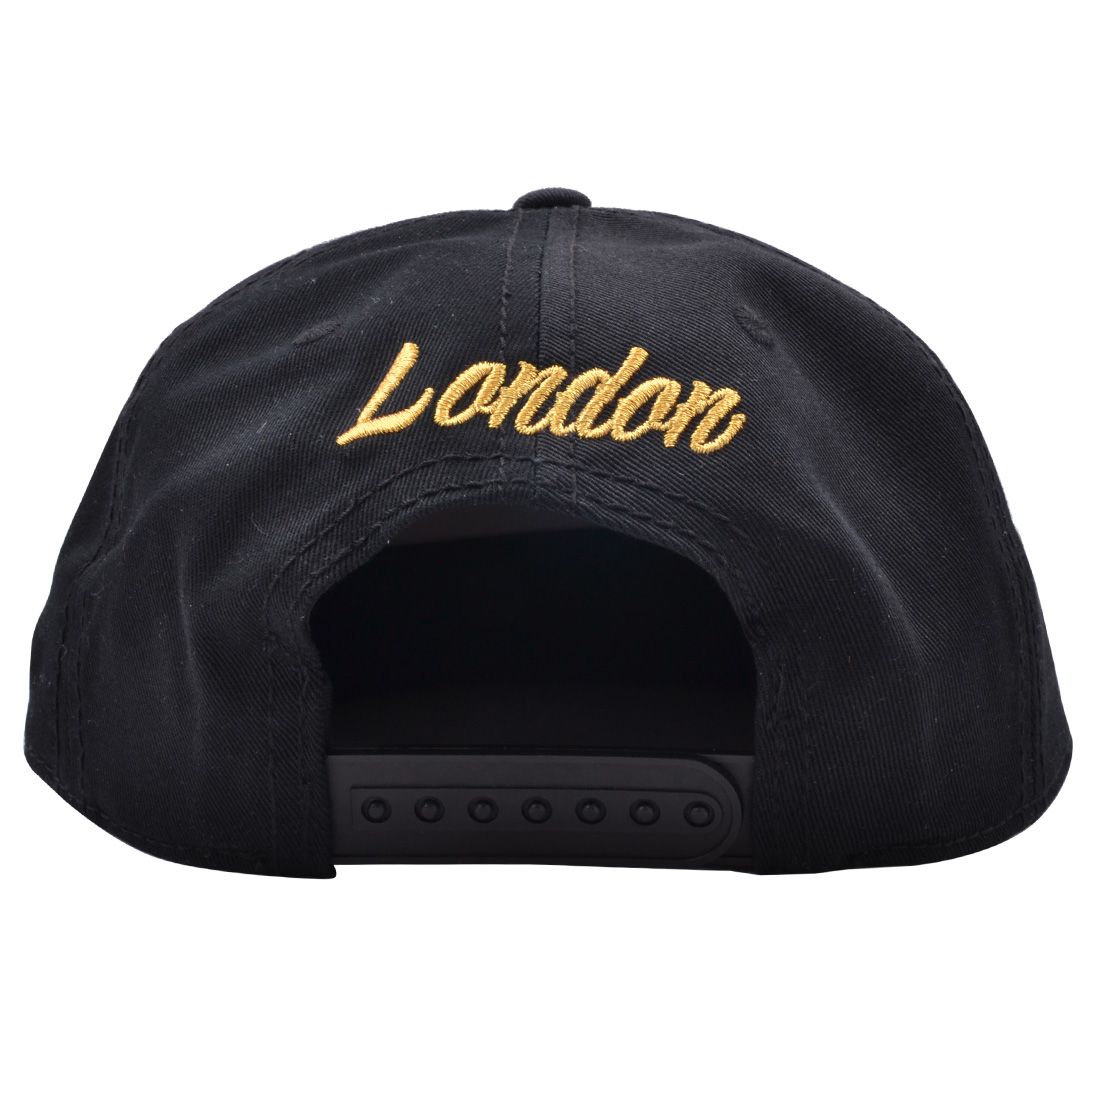 Youth Carbon212 London Snapback